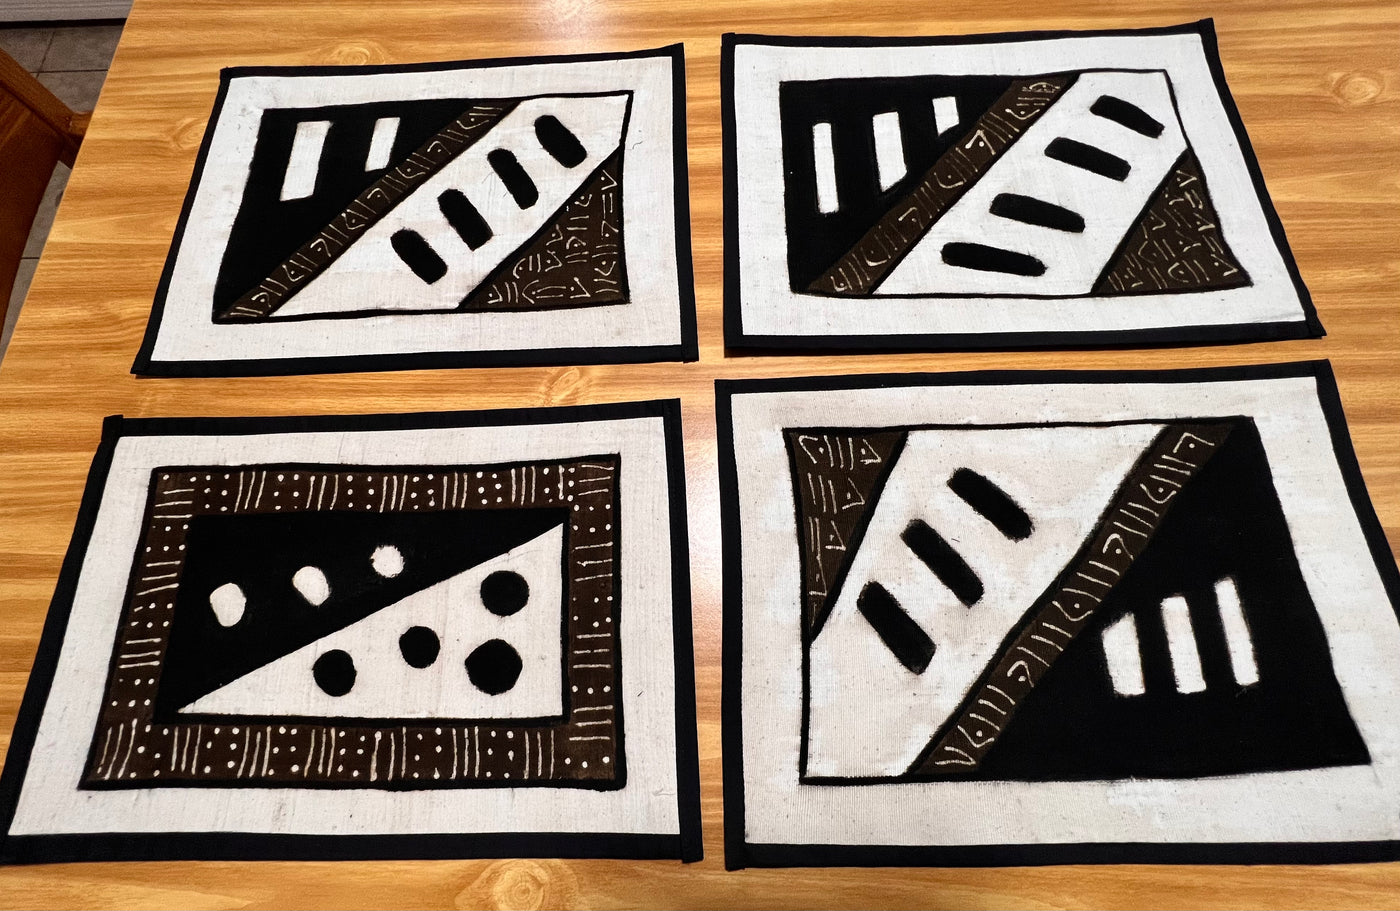 "Handwoven Mudcloth Placemats: A Journey to Mali’s Artisanship"